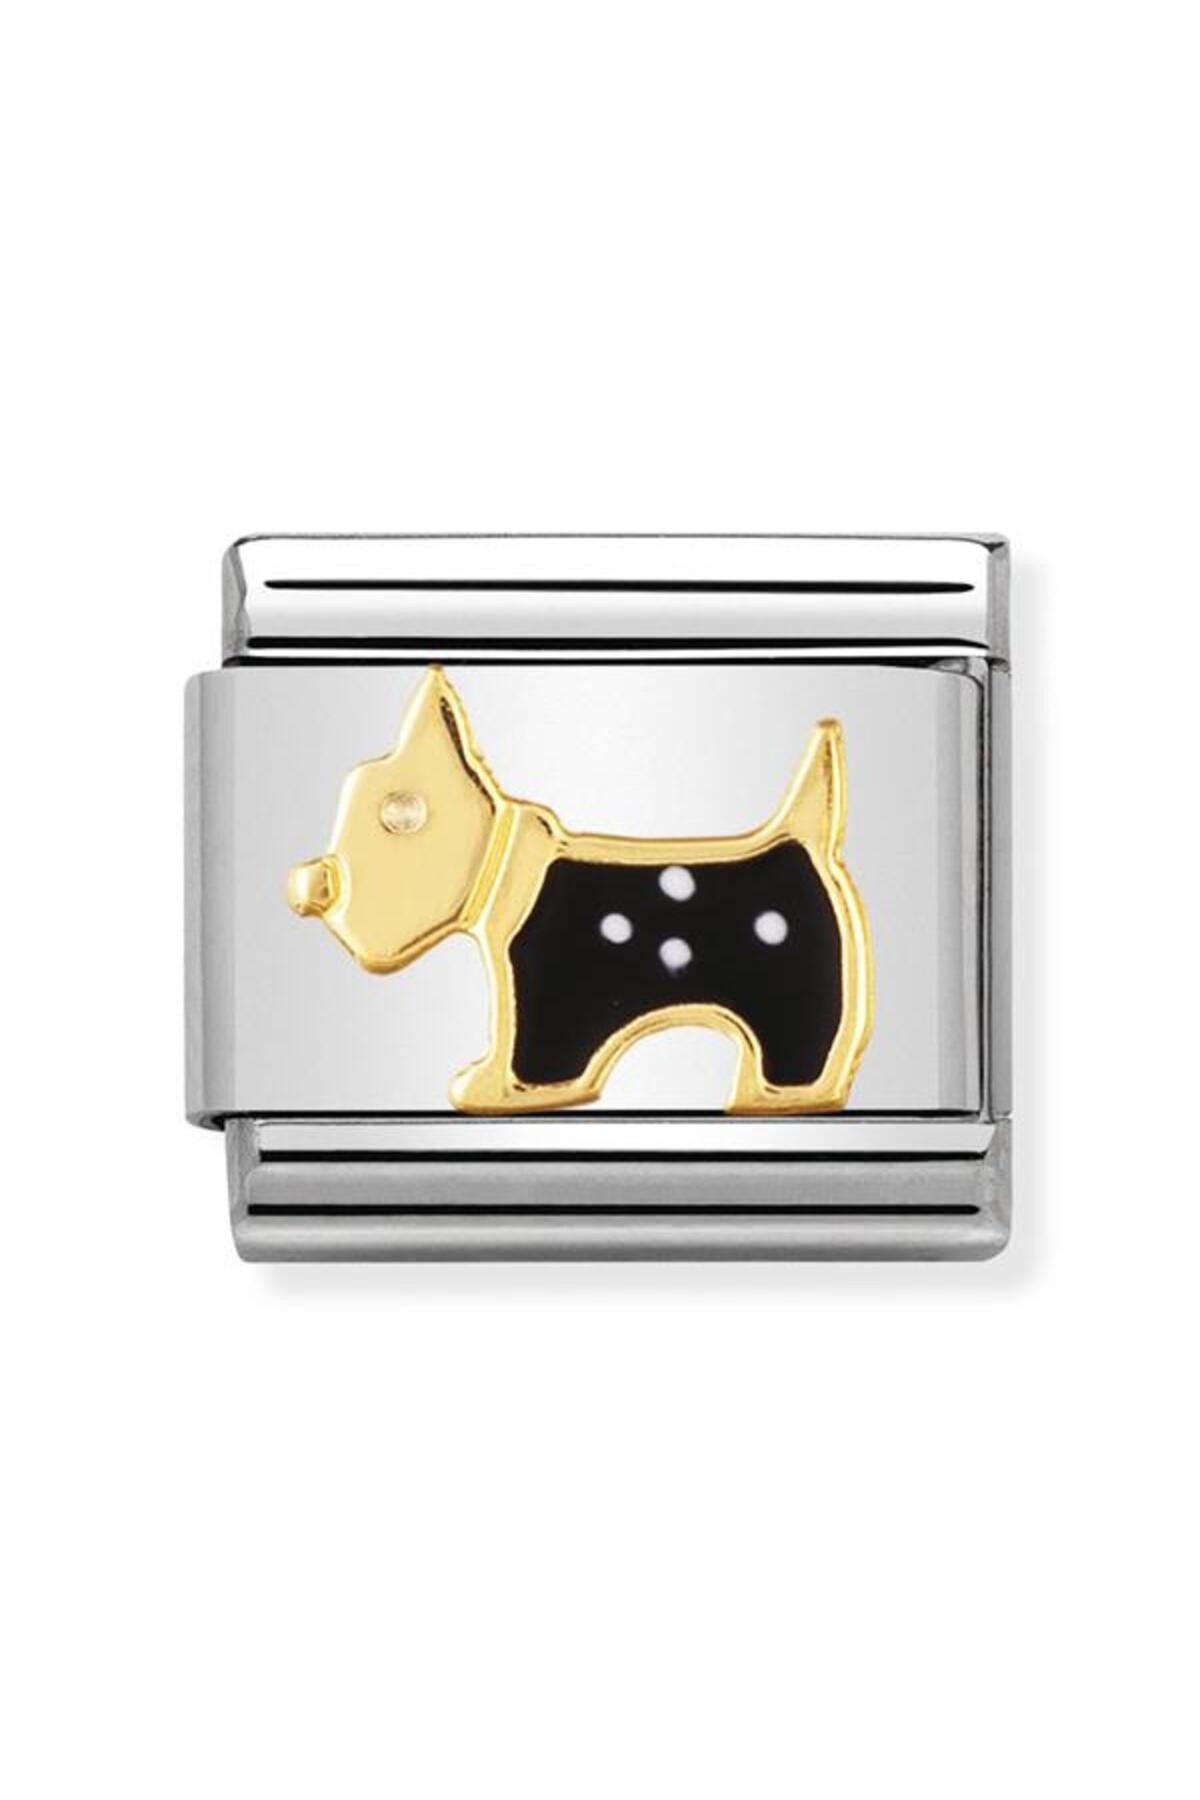 NOMİNATİON Composable Classic Earth Anımals 1 In Stainless Steel With Enamel And 18k Gold (09_terrier Dog)